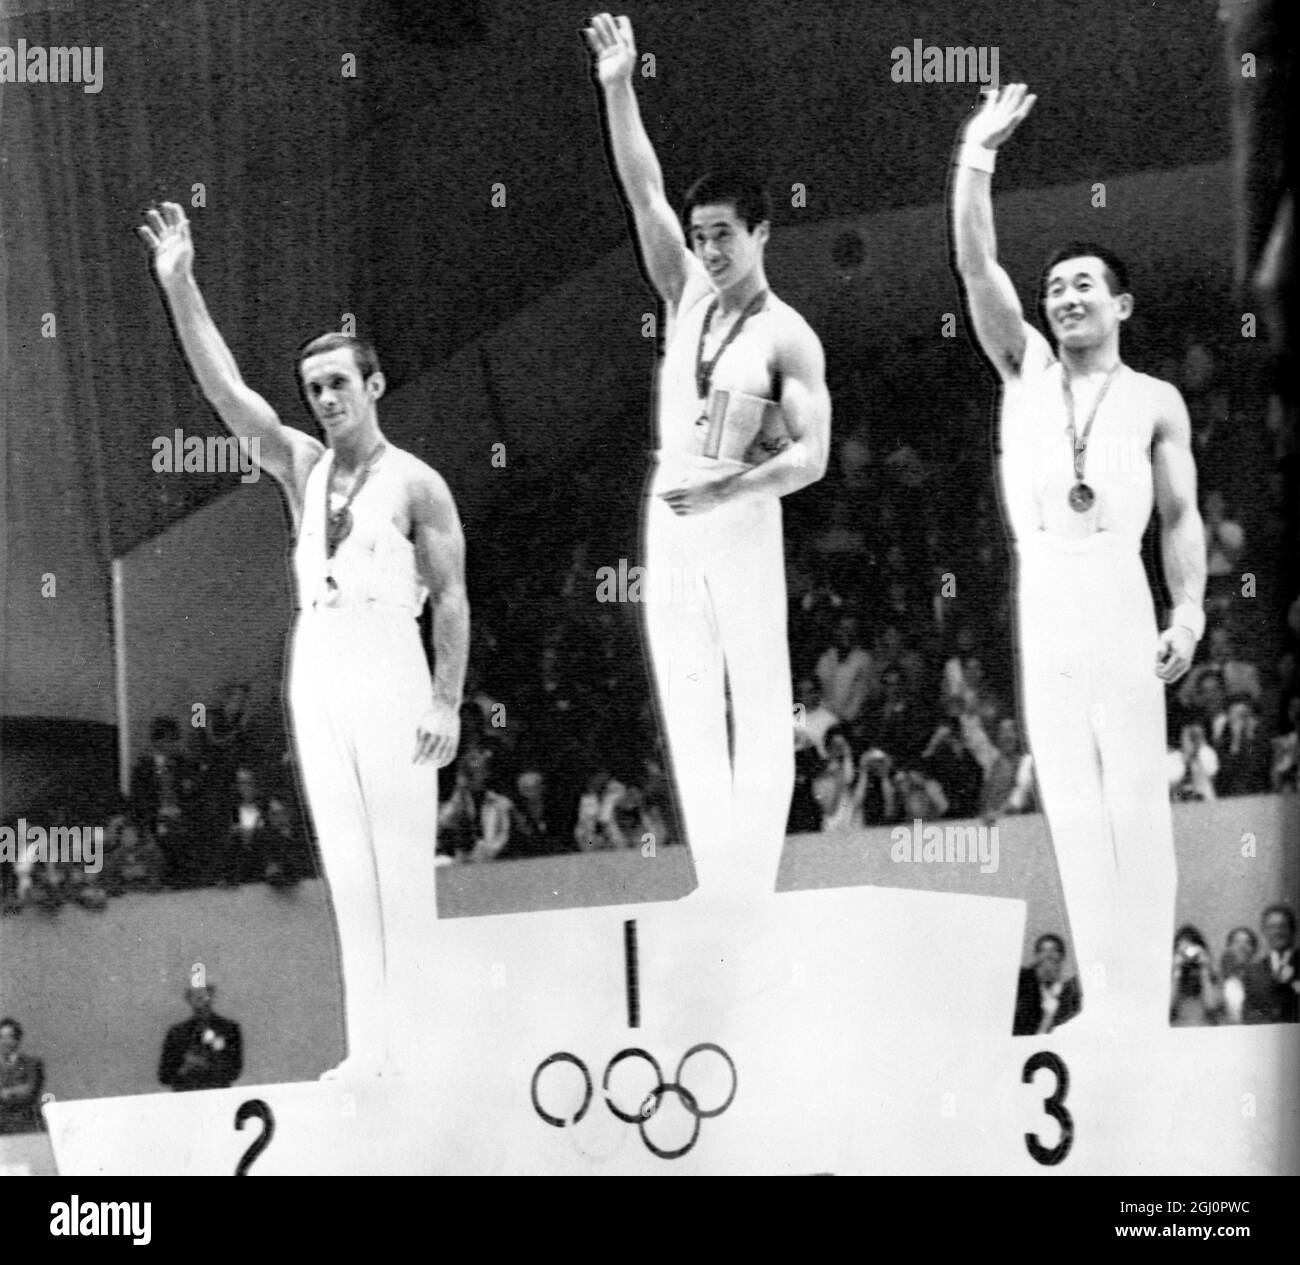 Mexico City : Medal winners of the Men's Combined Gymnastics on the victory podium in Mexico City . From left: Mikhail Voronin ( USSR ), silver ; Sawao Kato ( Japan ), Gold and Akinori Nakayama , also Japan , Bronze 25 October 1968 Stock Photo